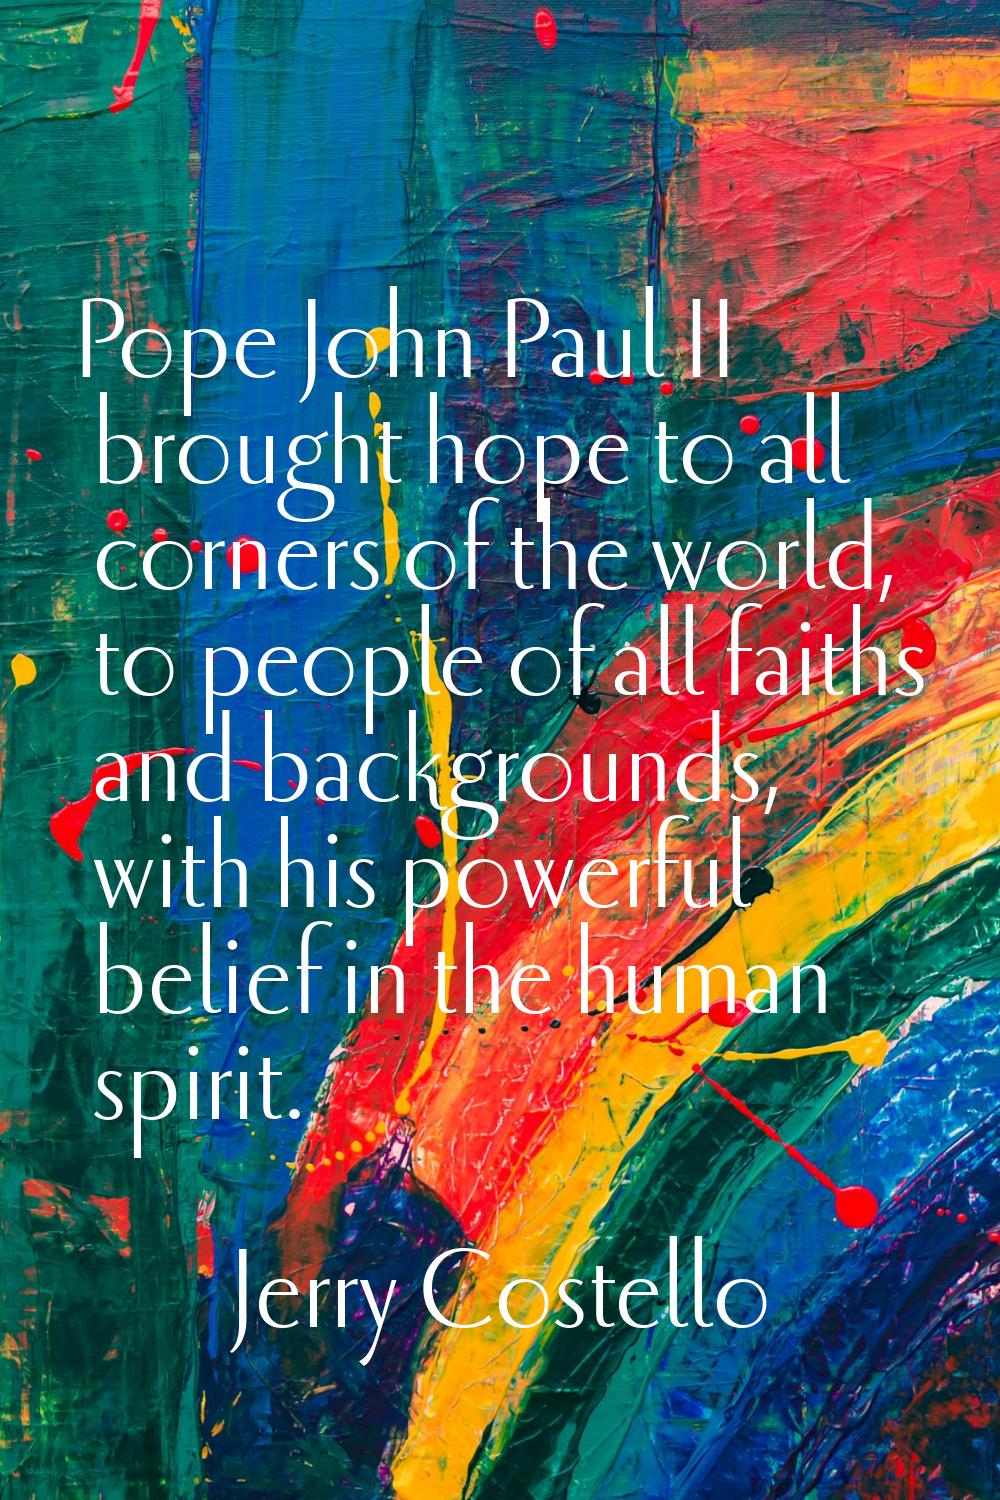 Pope John Paul II brought hope to all corners of the world, to people of all faiths and backgrounds